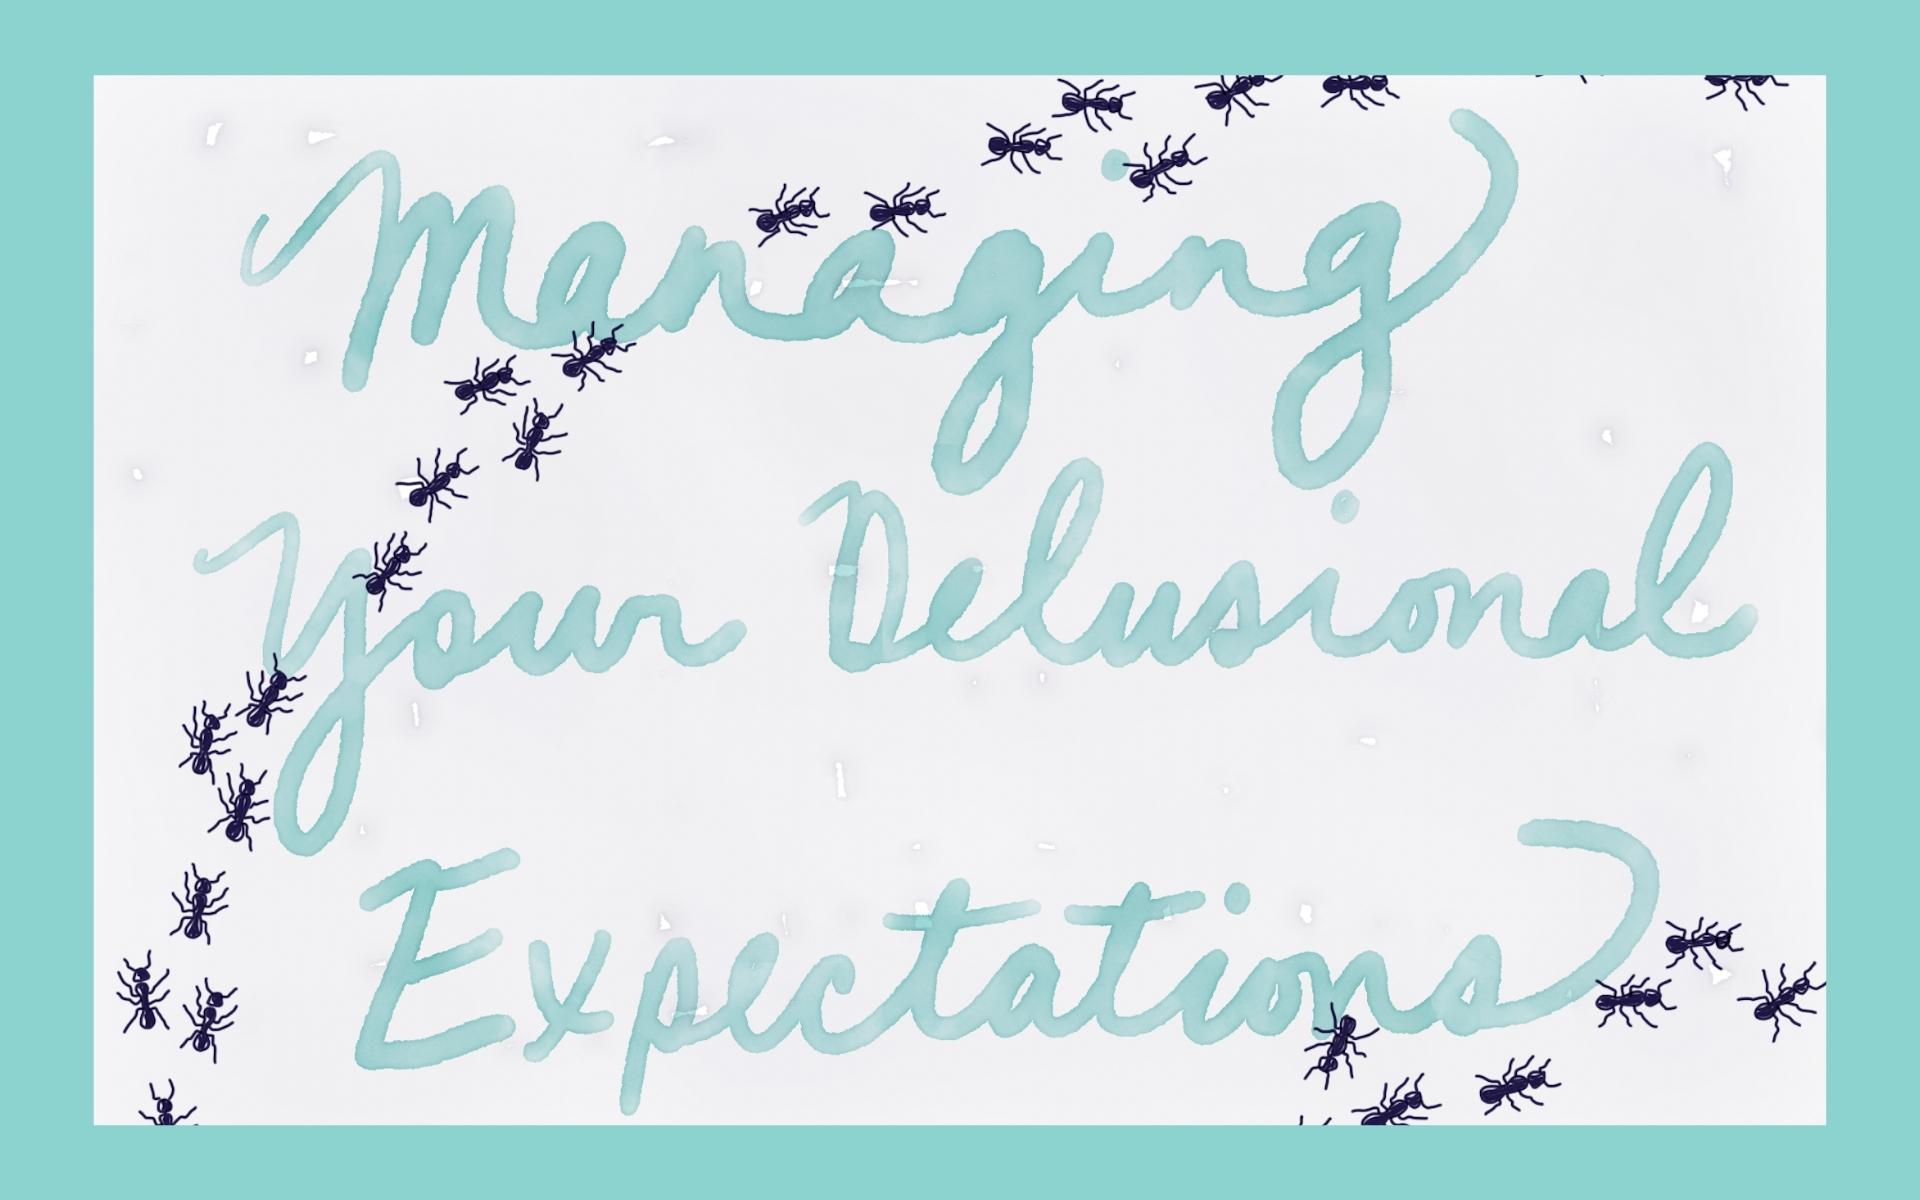 Managing Your Delusional Expectations